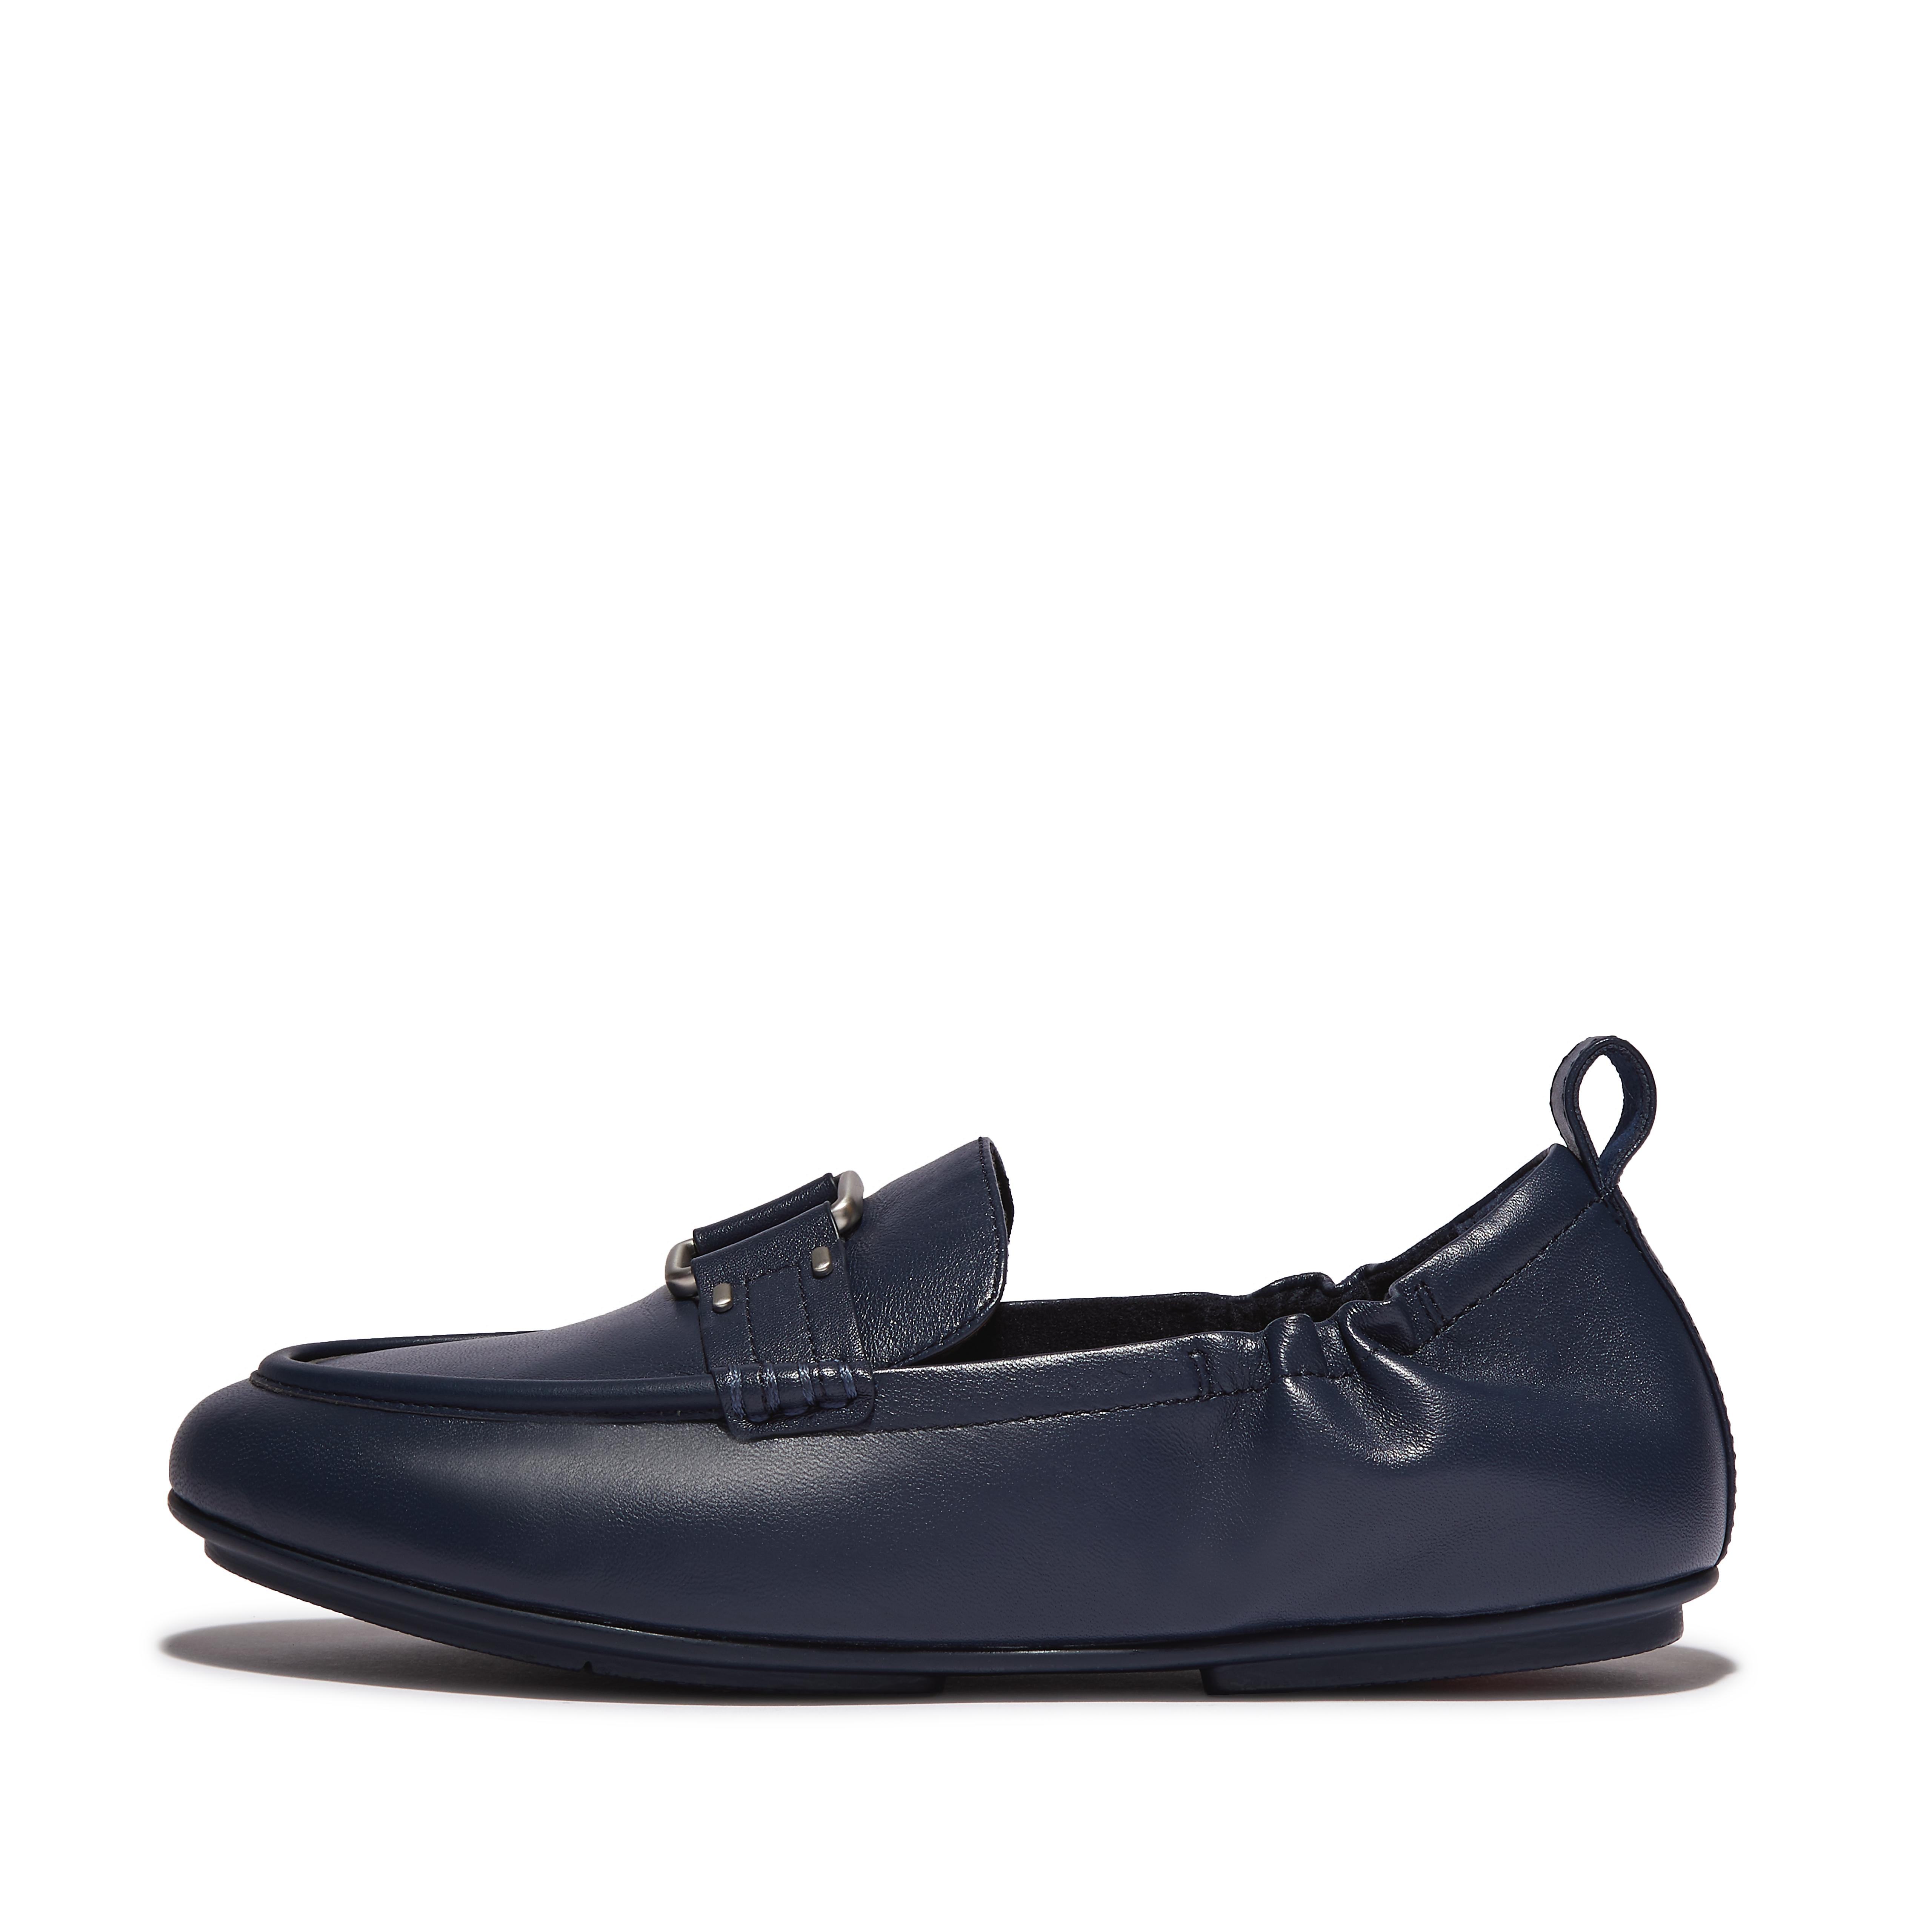 Fitflop Stud-Buckle Leather Loafers